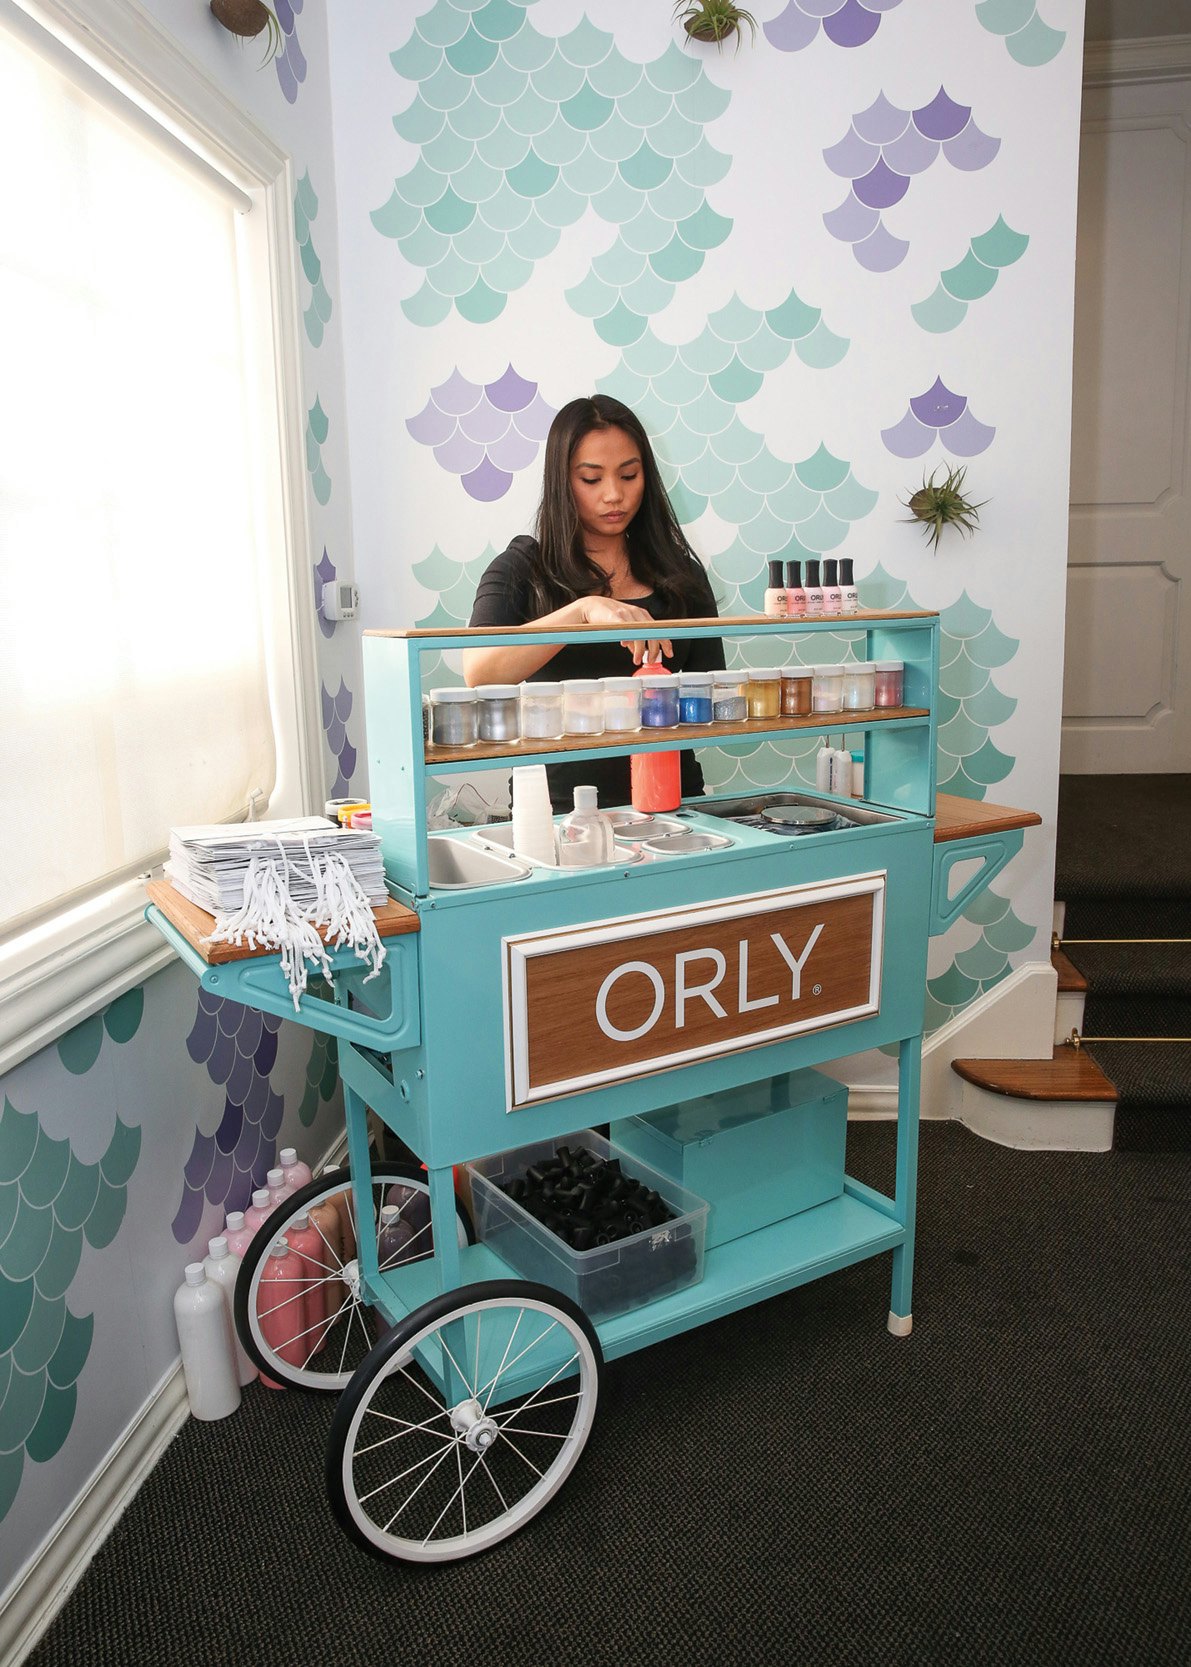 Orly Taps the Next Generation for Growth | Nailpro